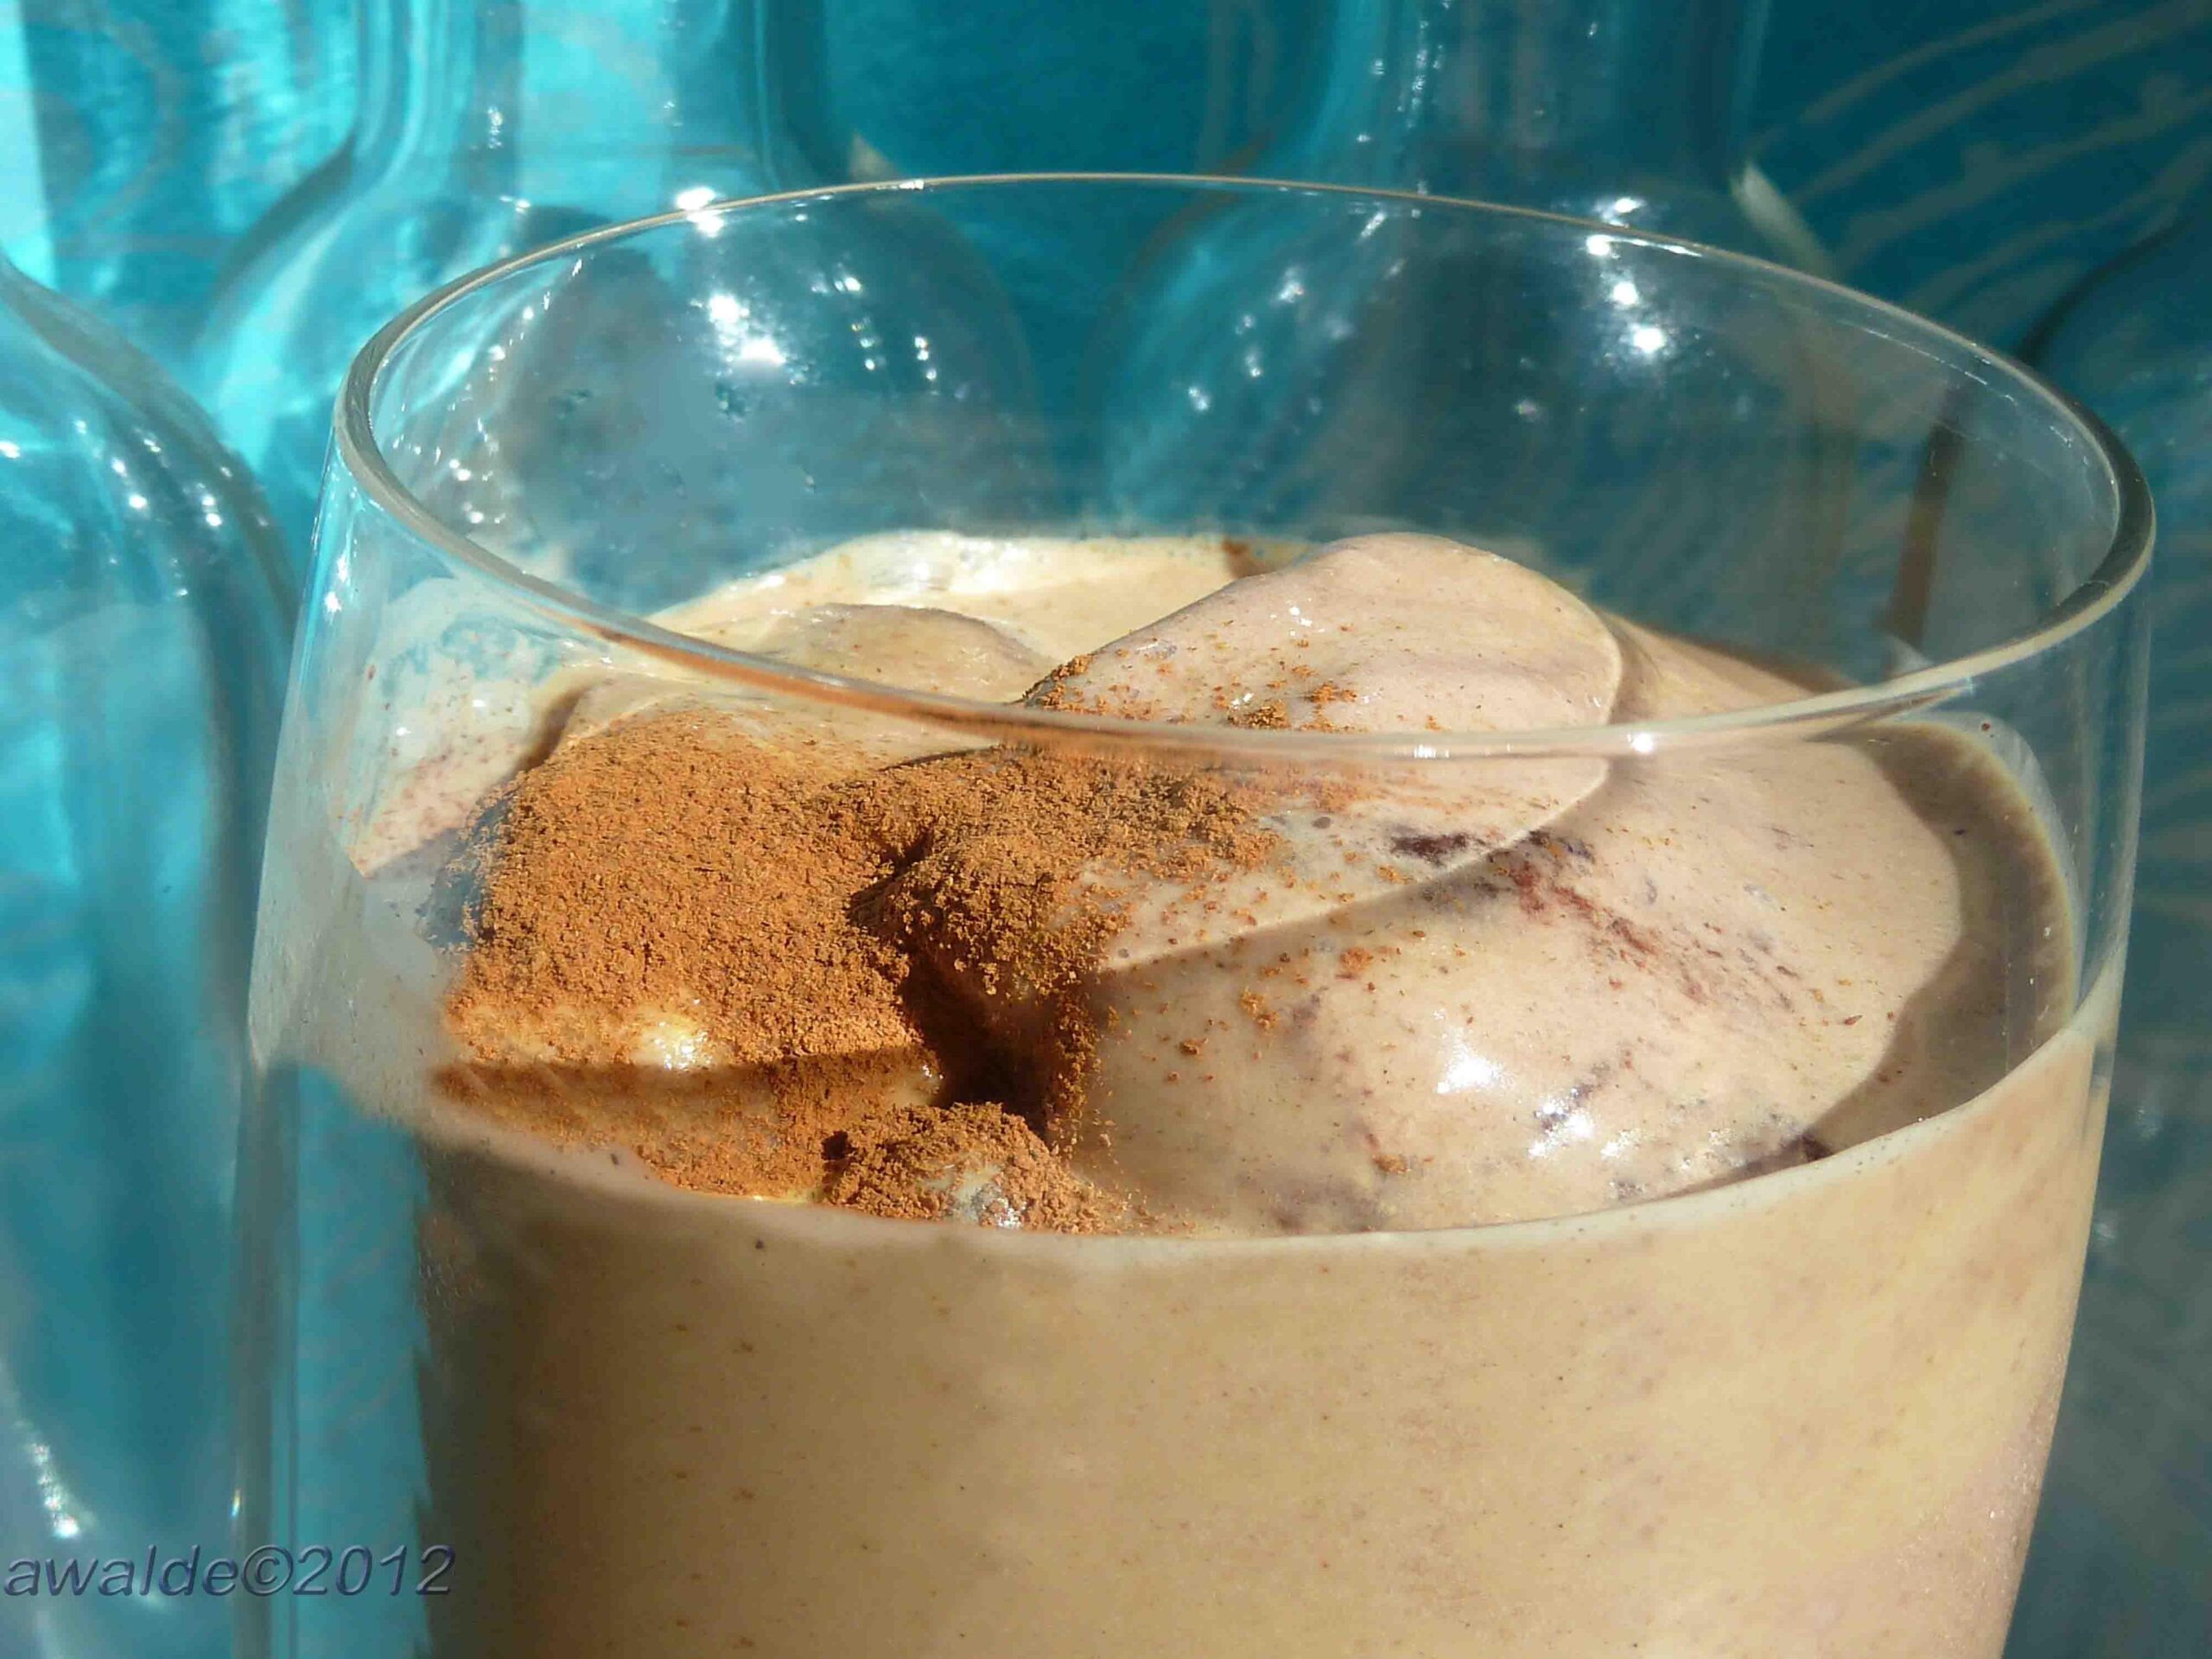 How to Make Mexican Coffee Chillata – An Iced Coffee Treat